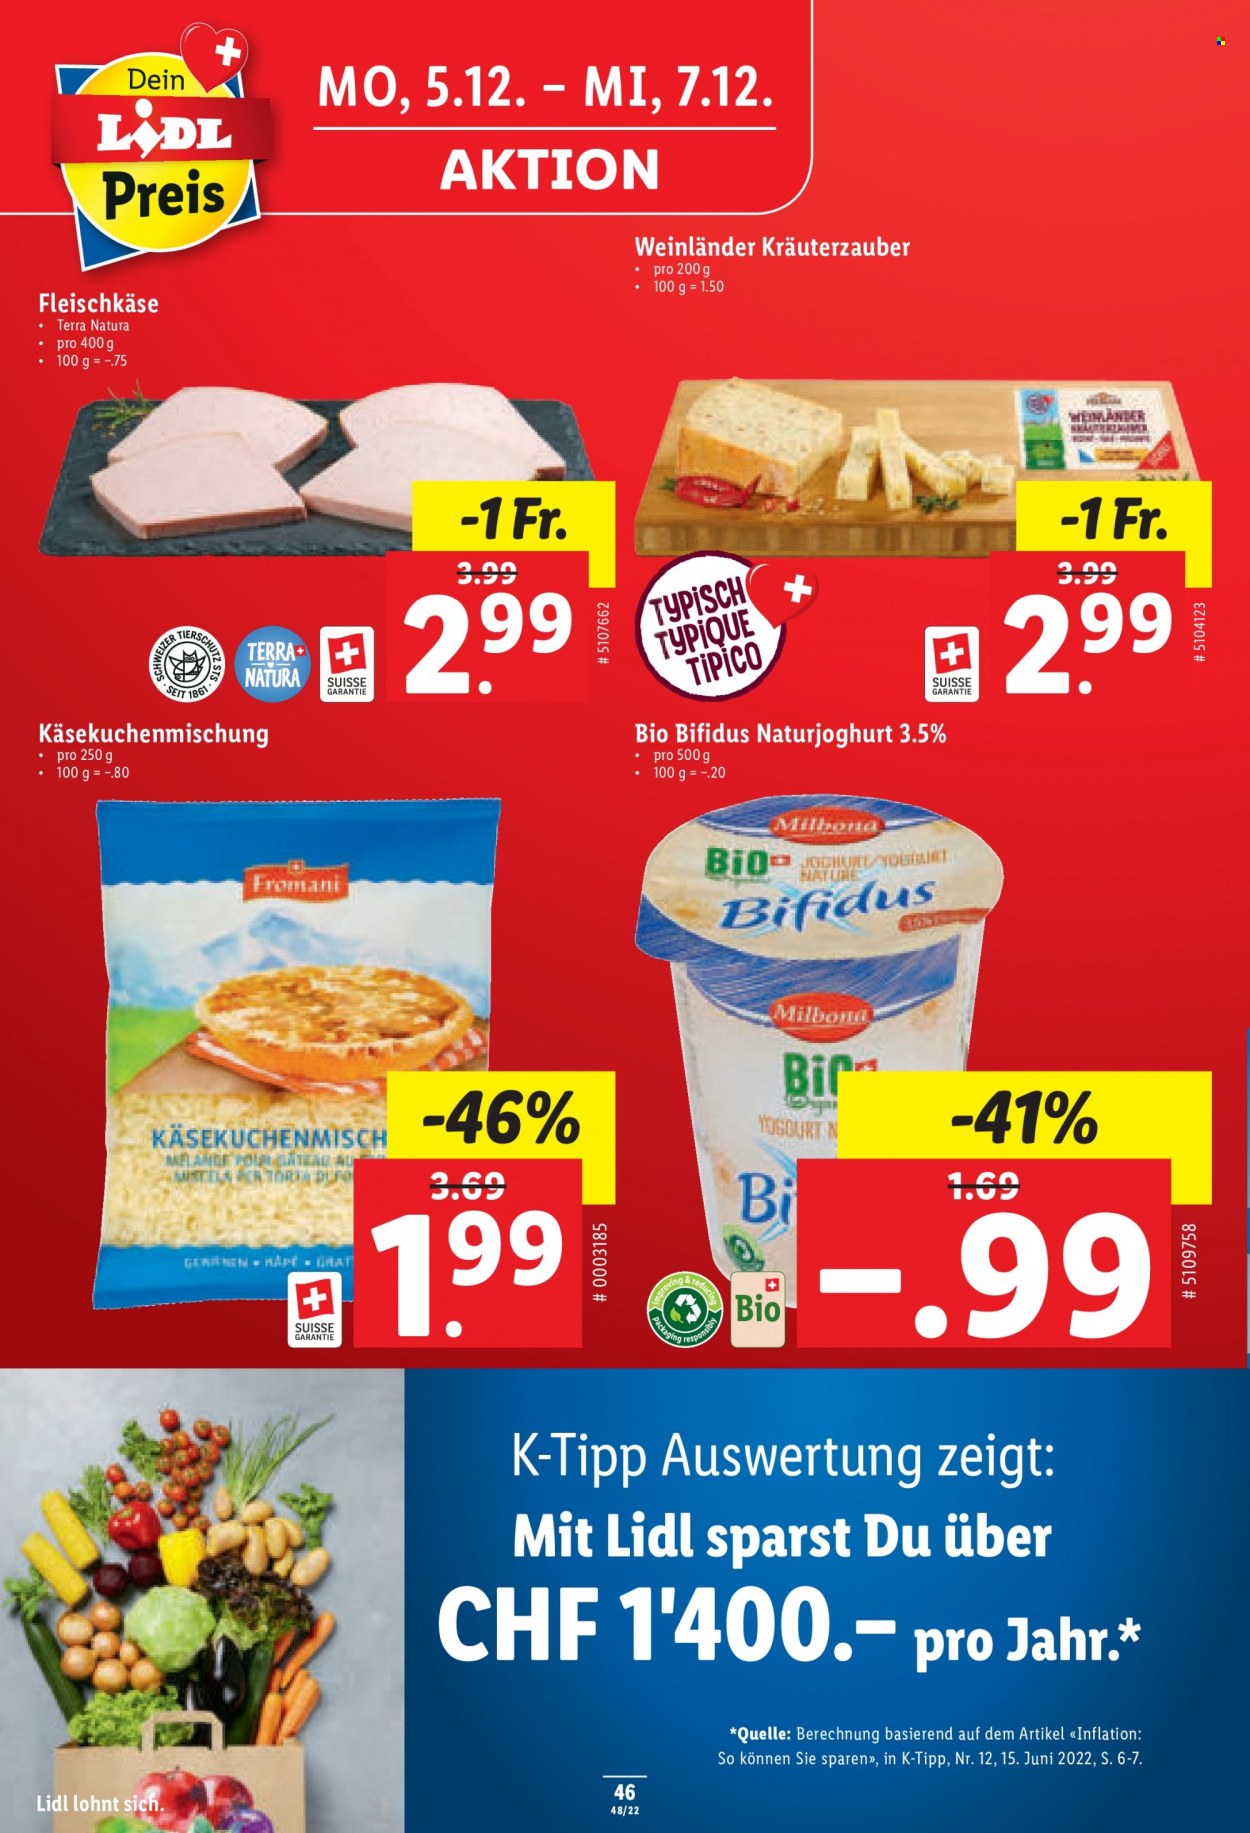 Catalogue Lidl - 1.12.2022 - 7.12.2022. Page 46.